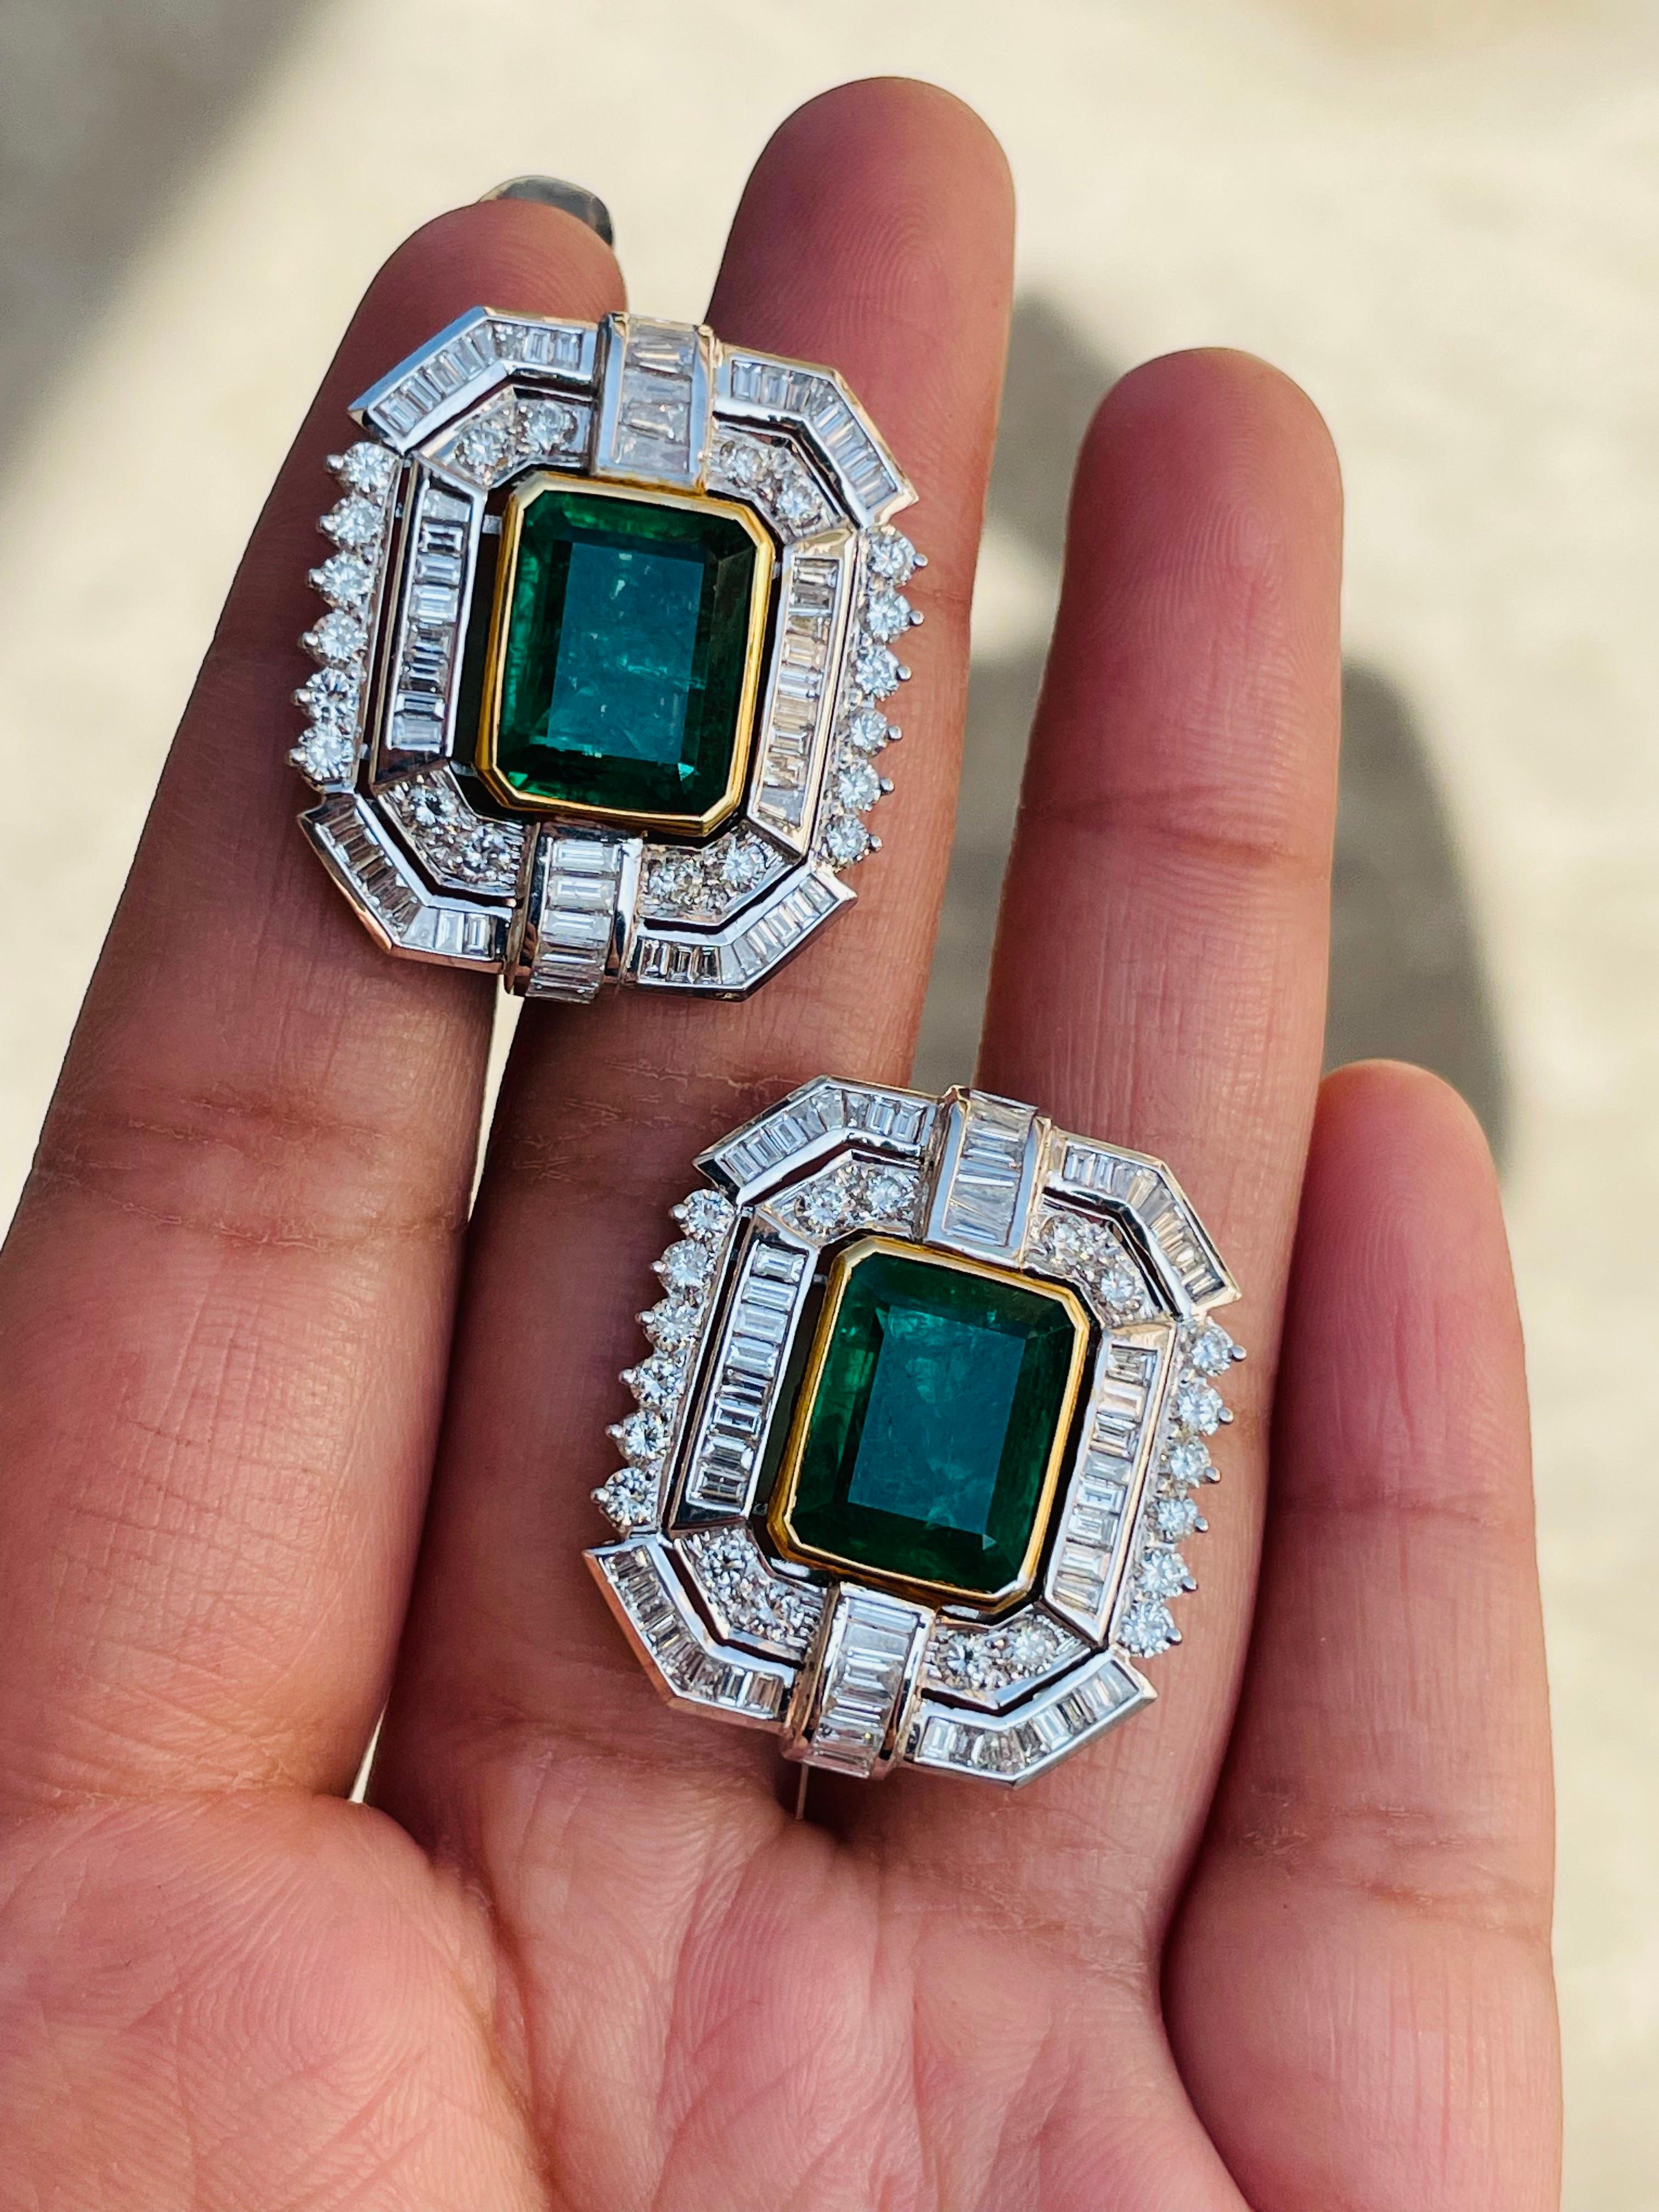 9.7 Carat Emerald Stud Earrings with Diamonds in 18K White Gold In New Condition For Sale In Houston, TX